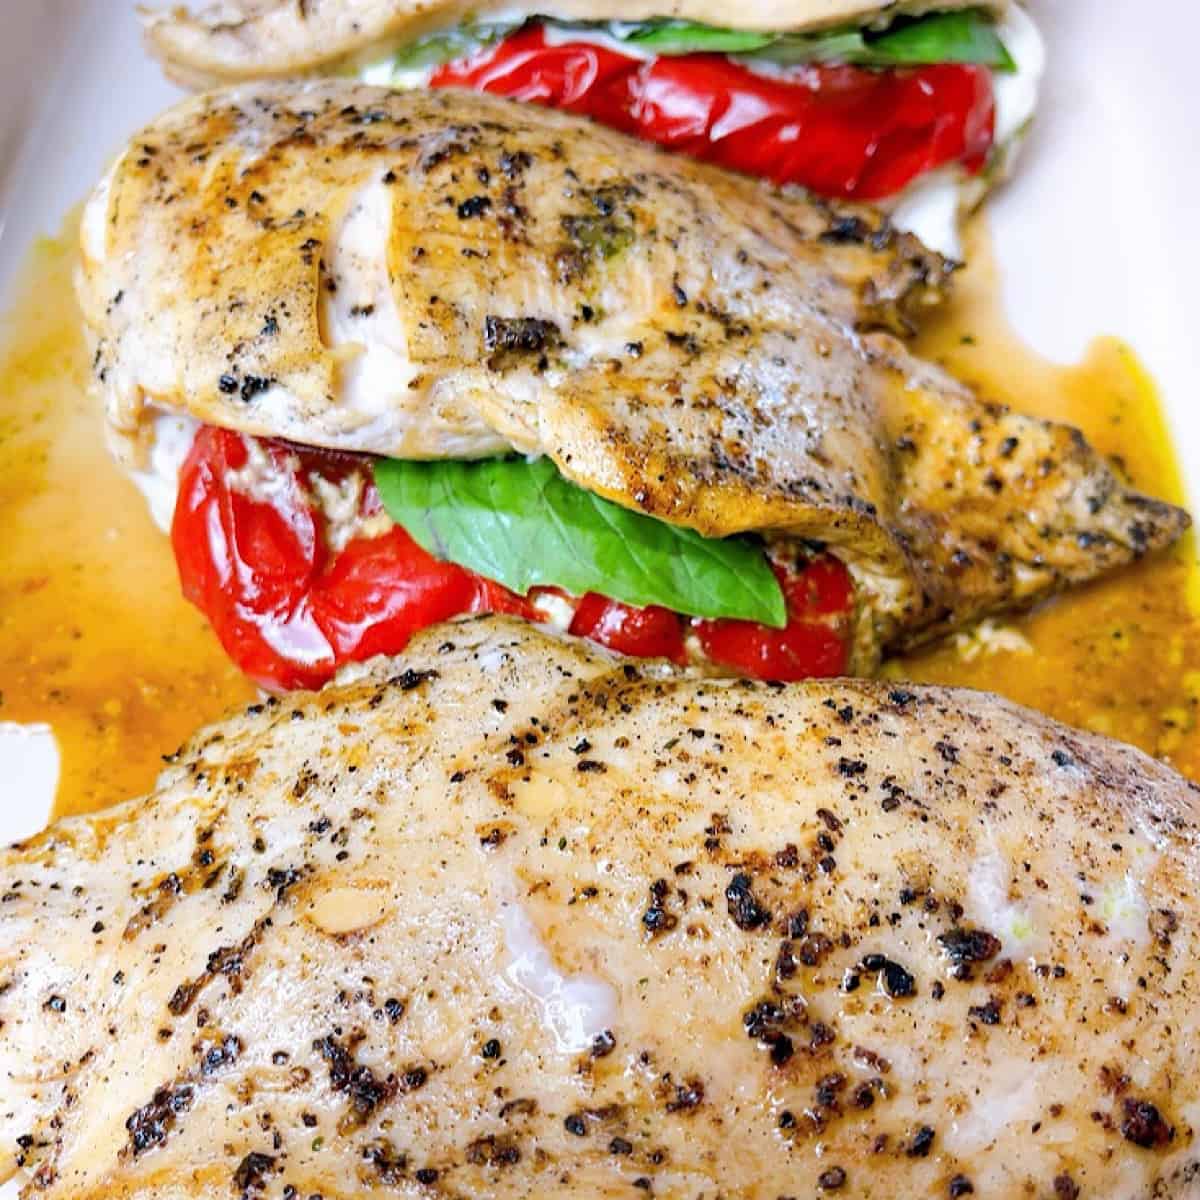 Stuffed Chicken with Roasted Red Pepper, Spinach, and Mozzarella